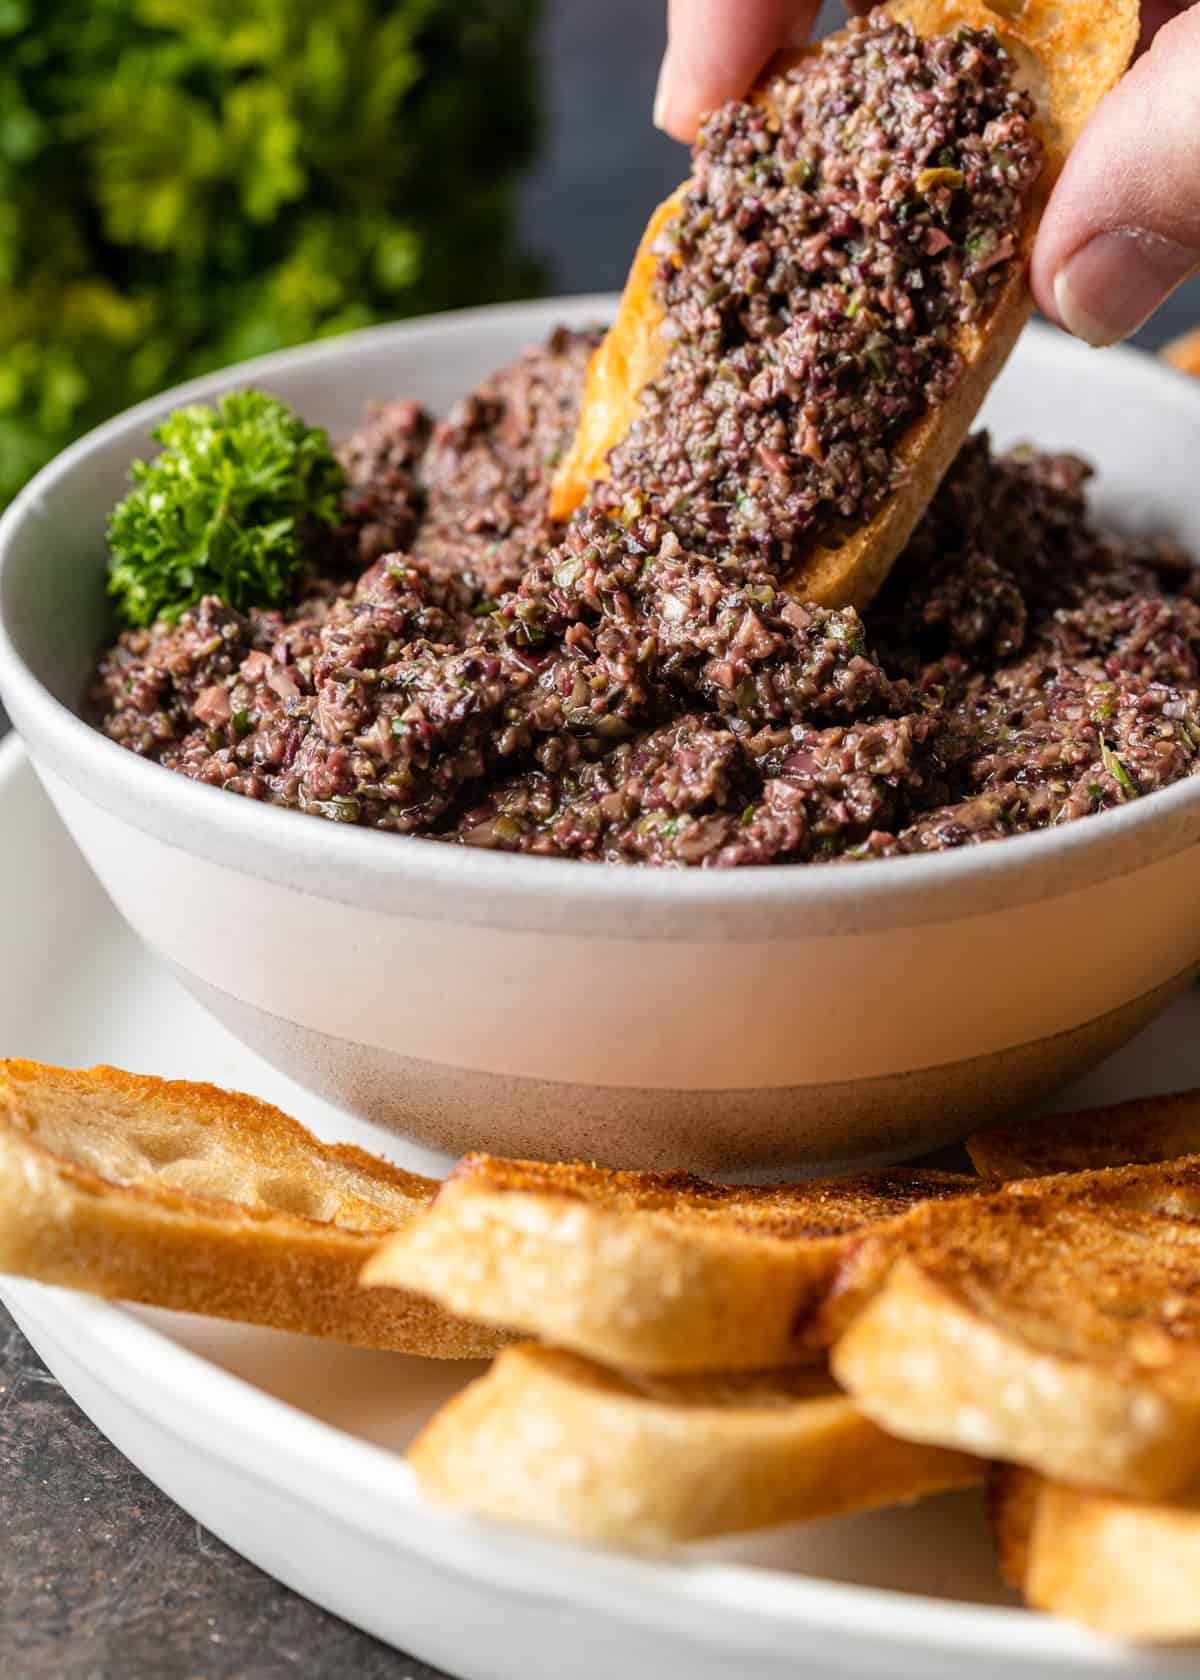 dipping bread into Olive Tapenade